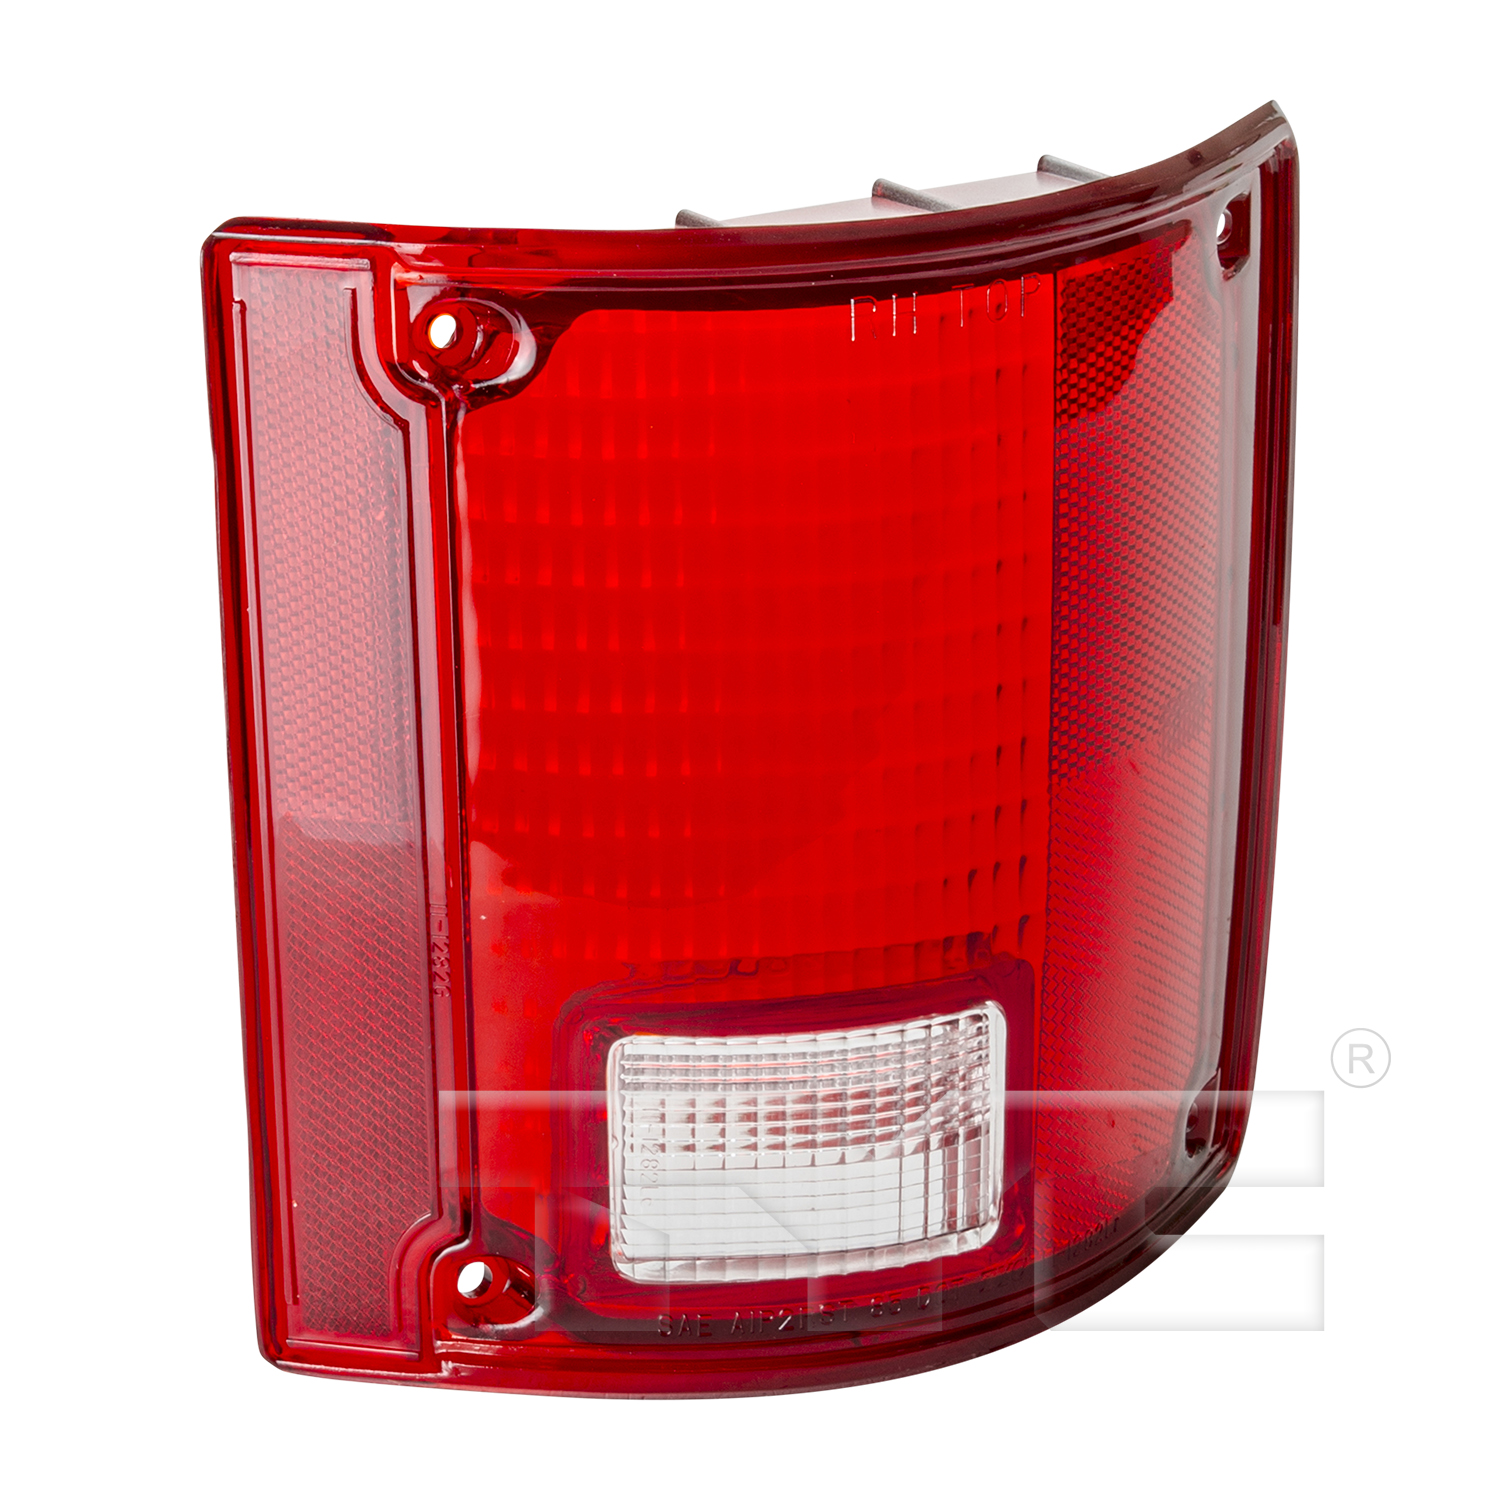 Aftermarket TAILLIGHTS for GMC - R2500, R2500,87-89,RT Taillamp lens